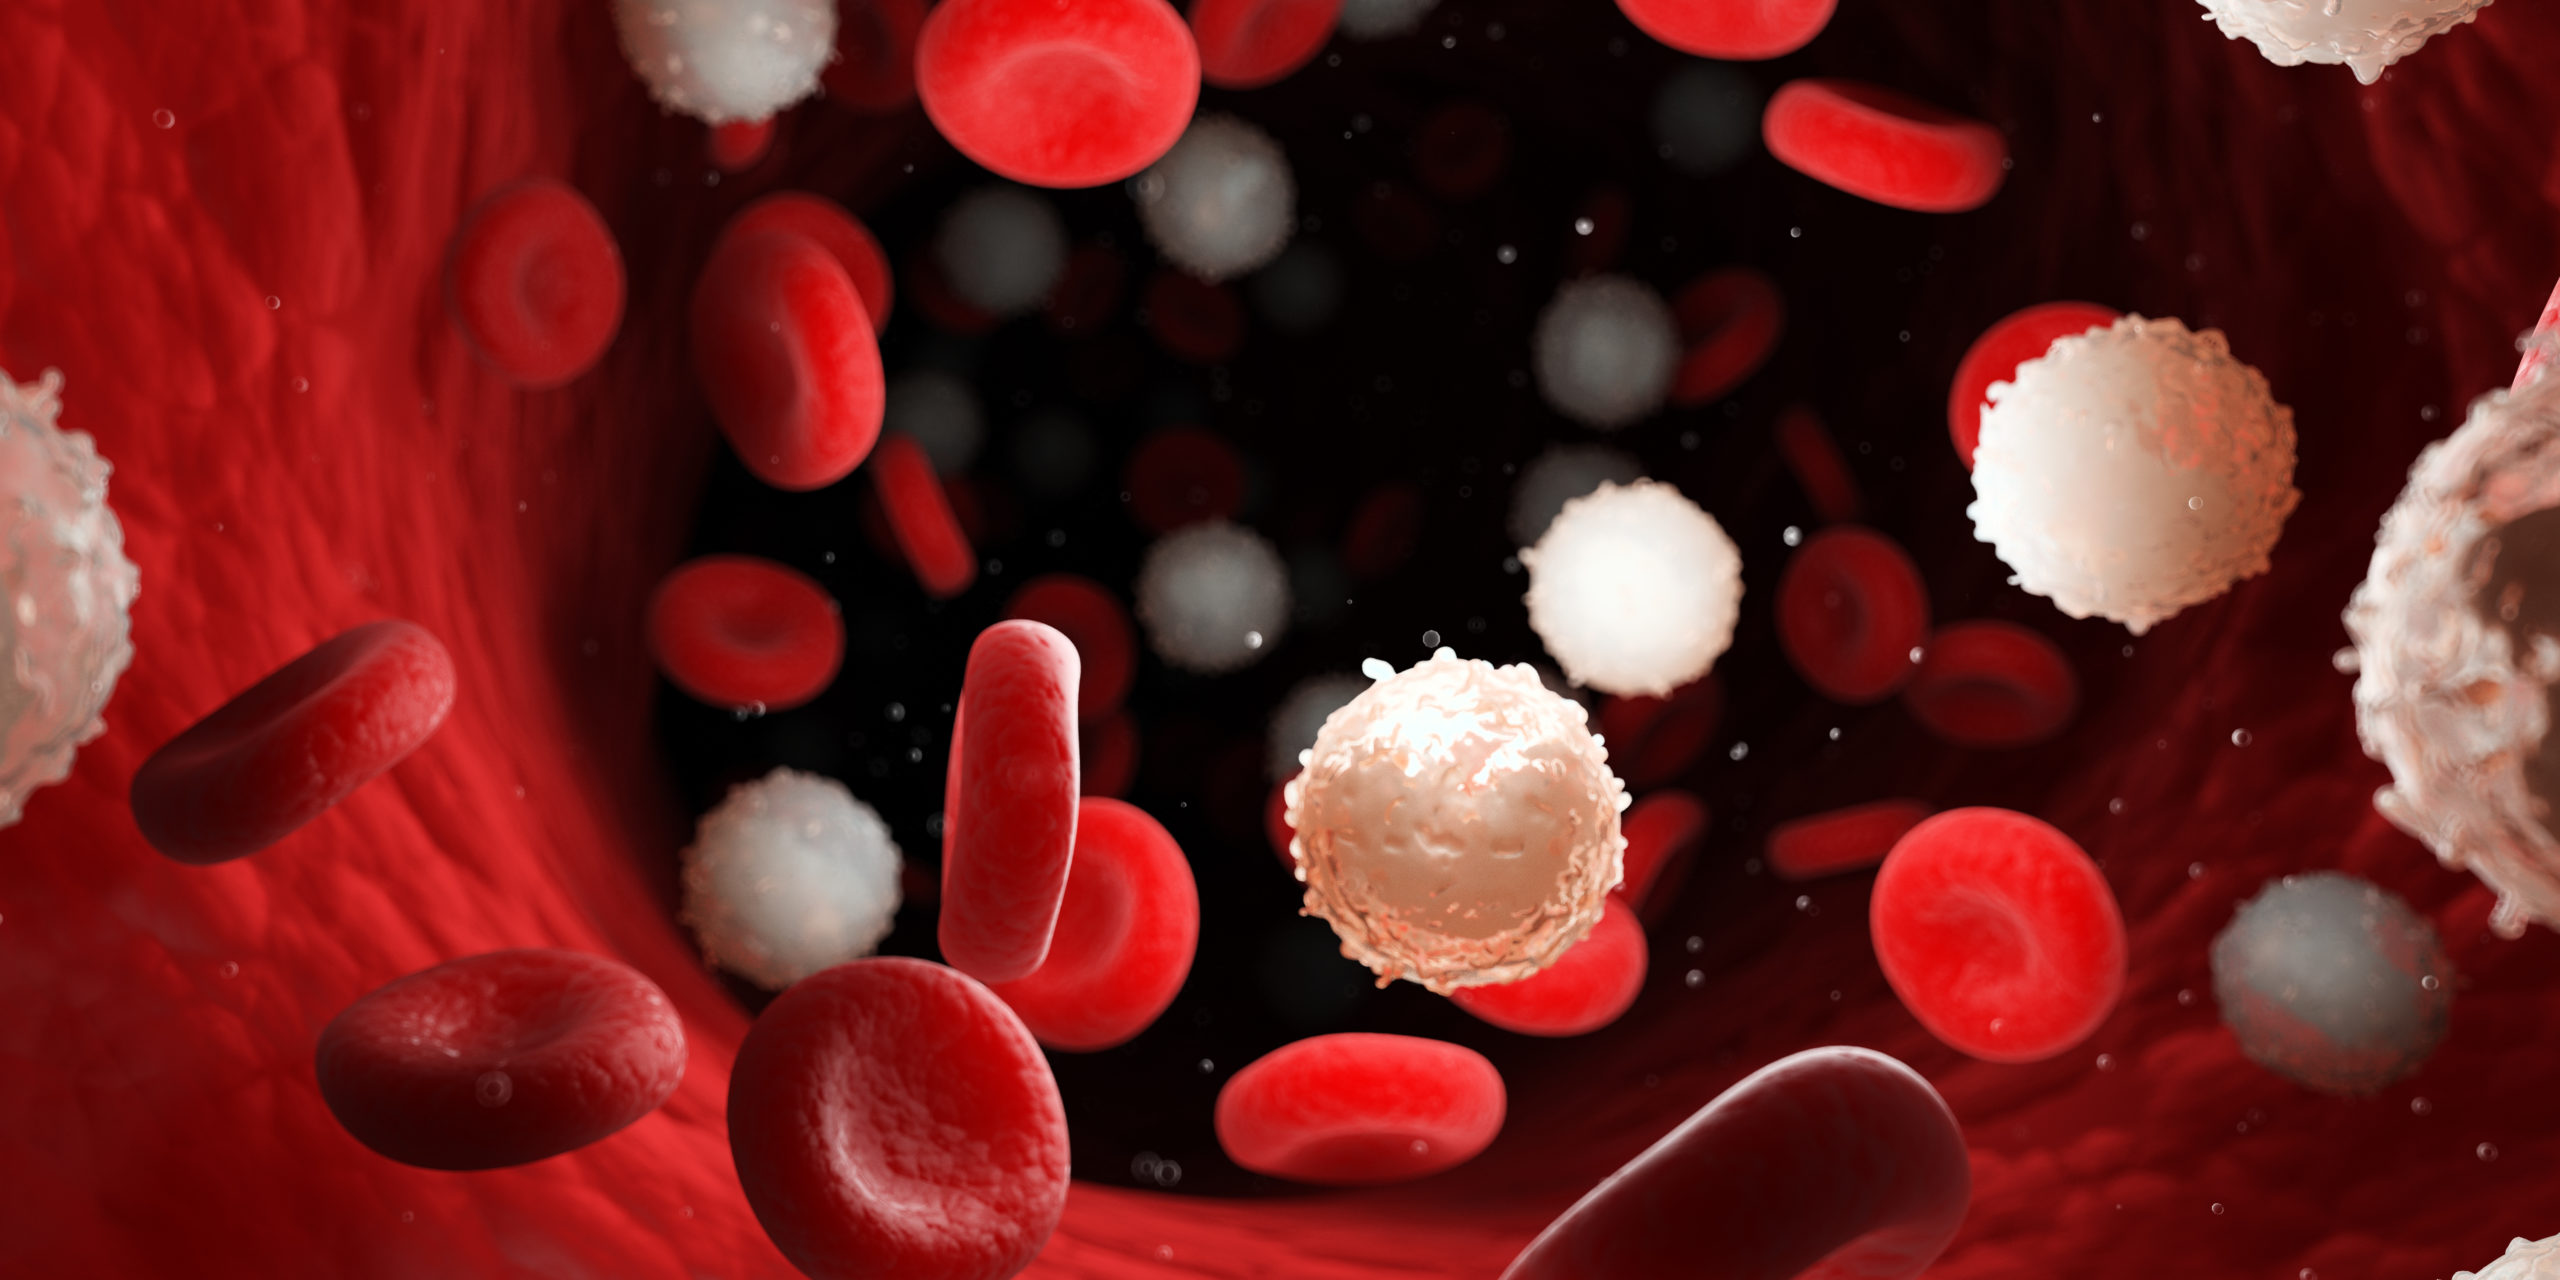 Image of red and white blood cells circulating through a pathway